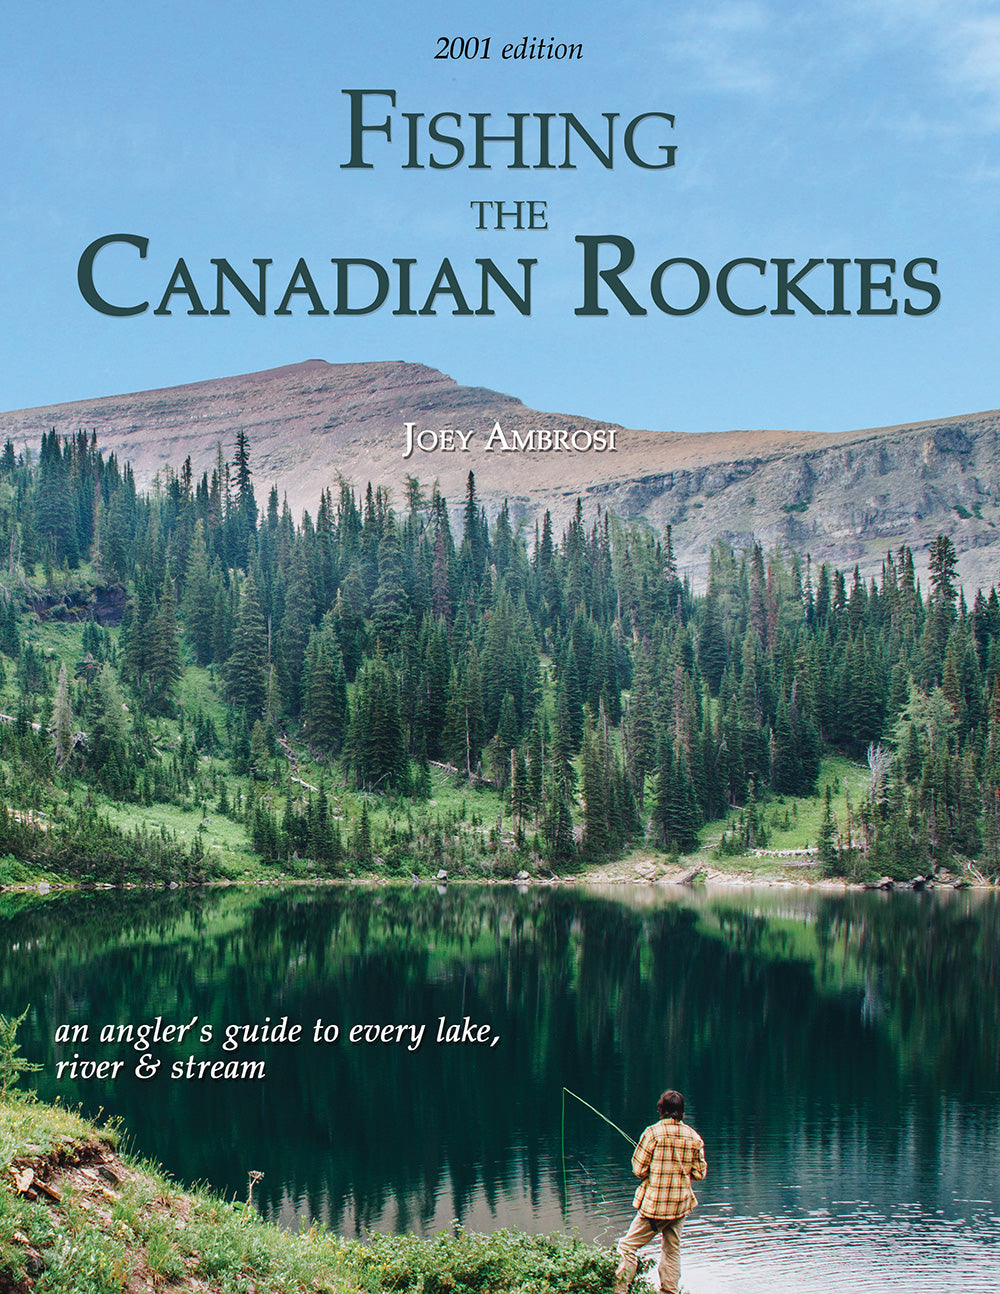 Fishing the Canadian Rockies 1st Edition Joey Ambrossi